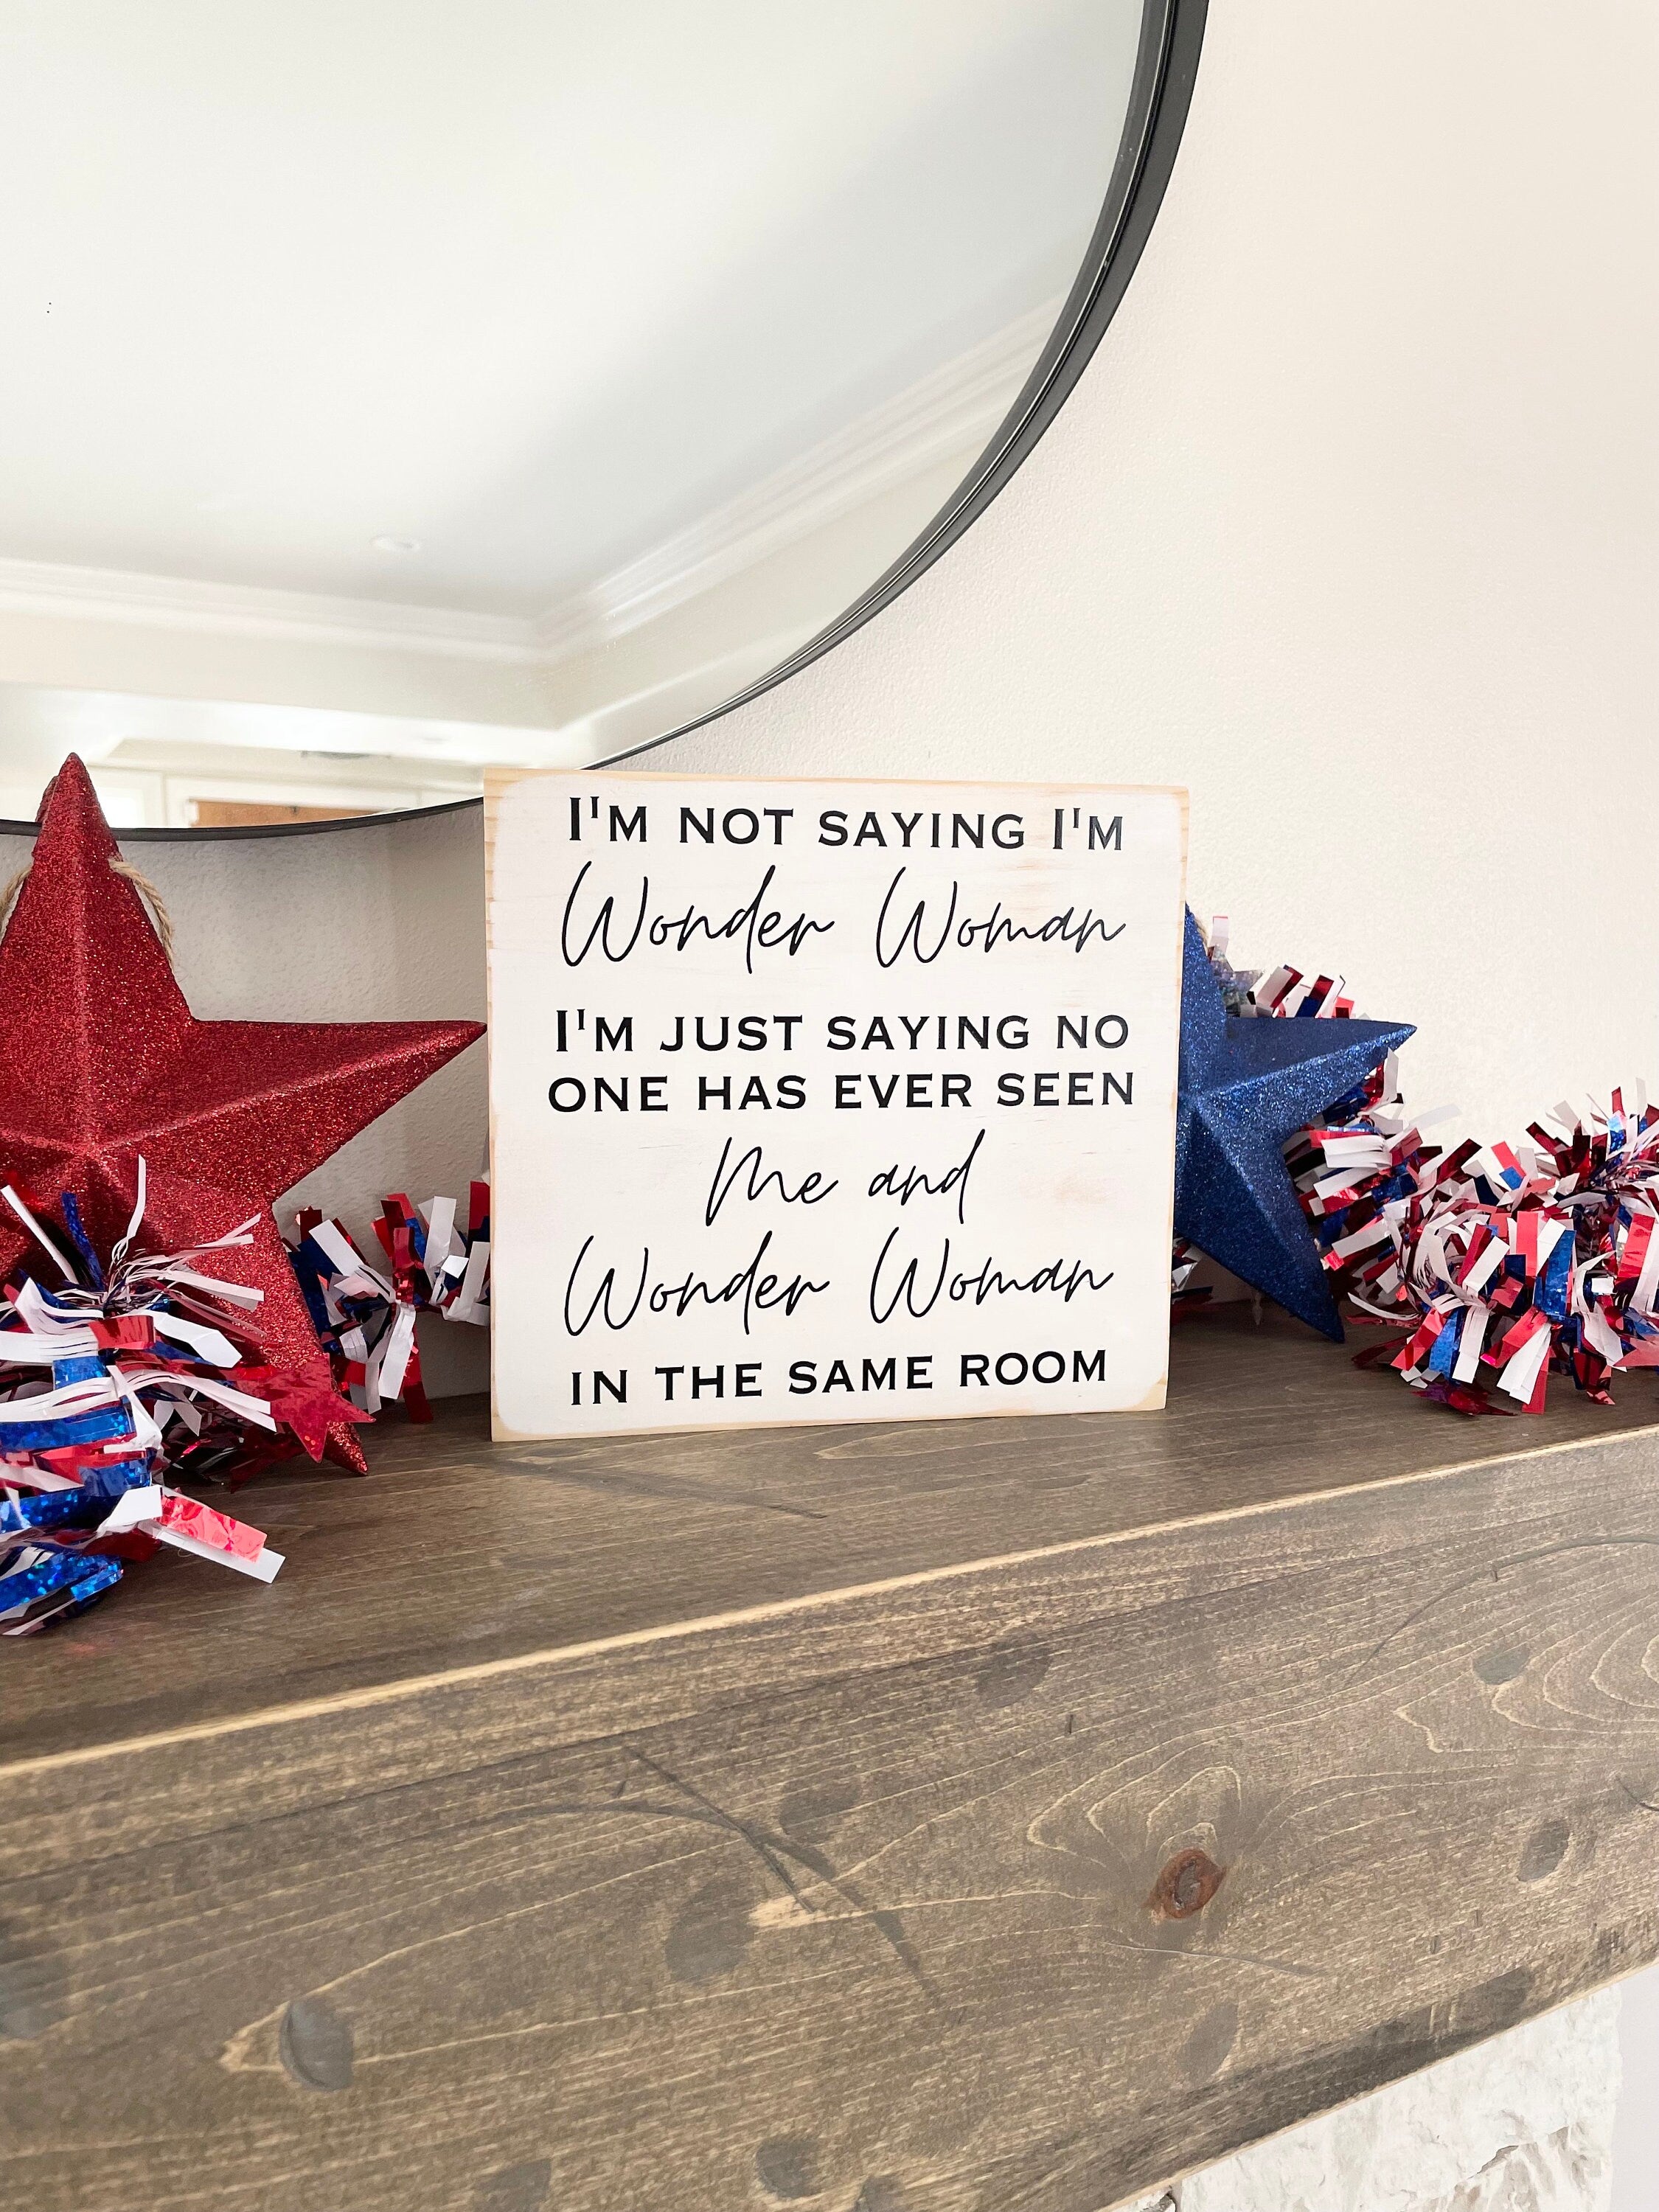 medium sized square wood sign painted white with black lettering that reads, " I'm not saying I'm Wonder Woman, I'm just saying no one has ever seen me and Wonder Woman in the same room". All text is in all caps except for "Wonder Woman" and "Me and Wonder Woman". Text is centered, takes up the entire area and is on 7 lines. Glossy finish.